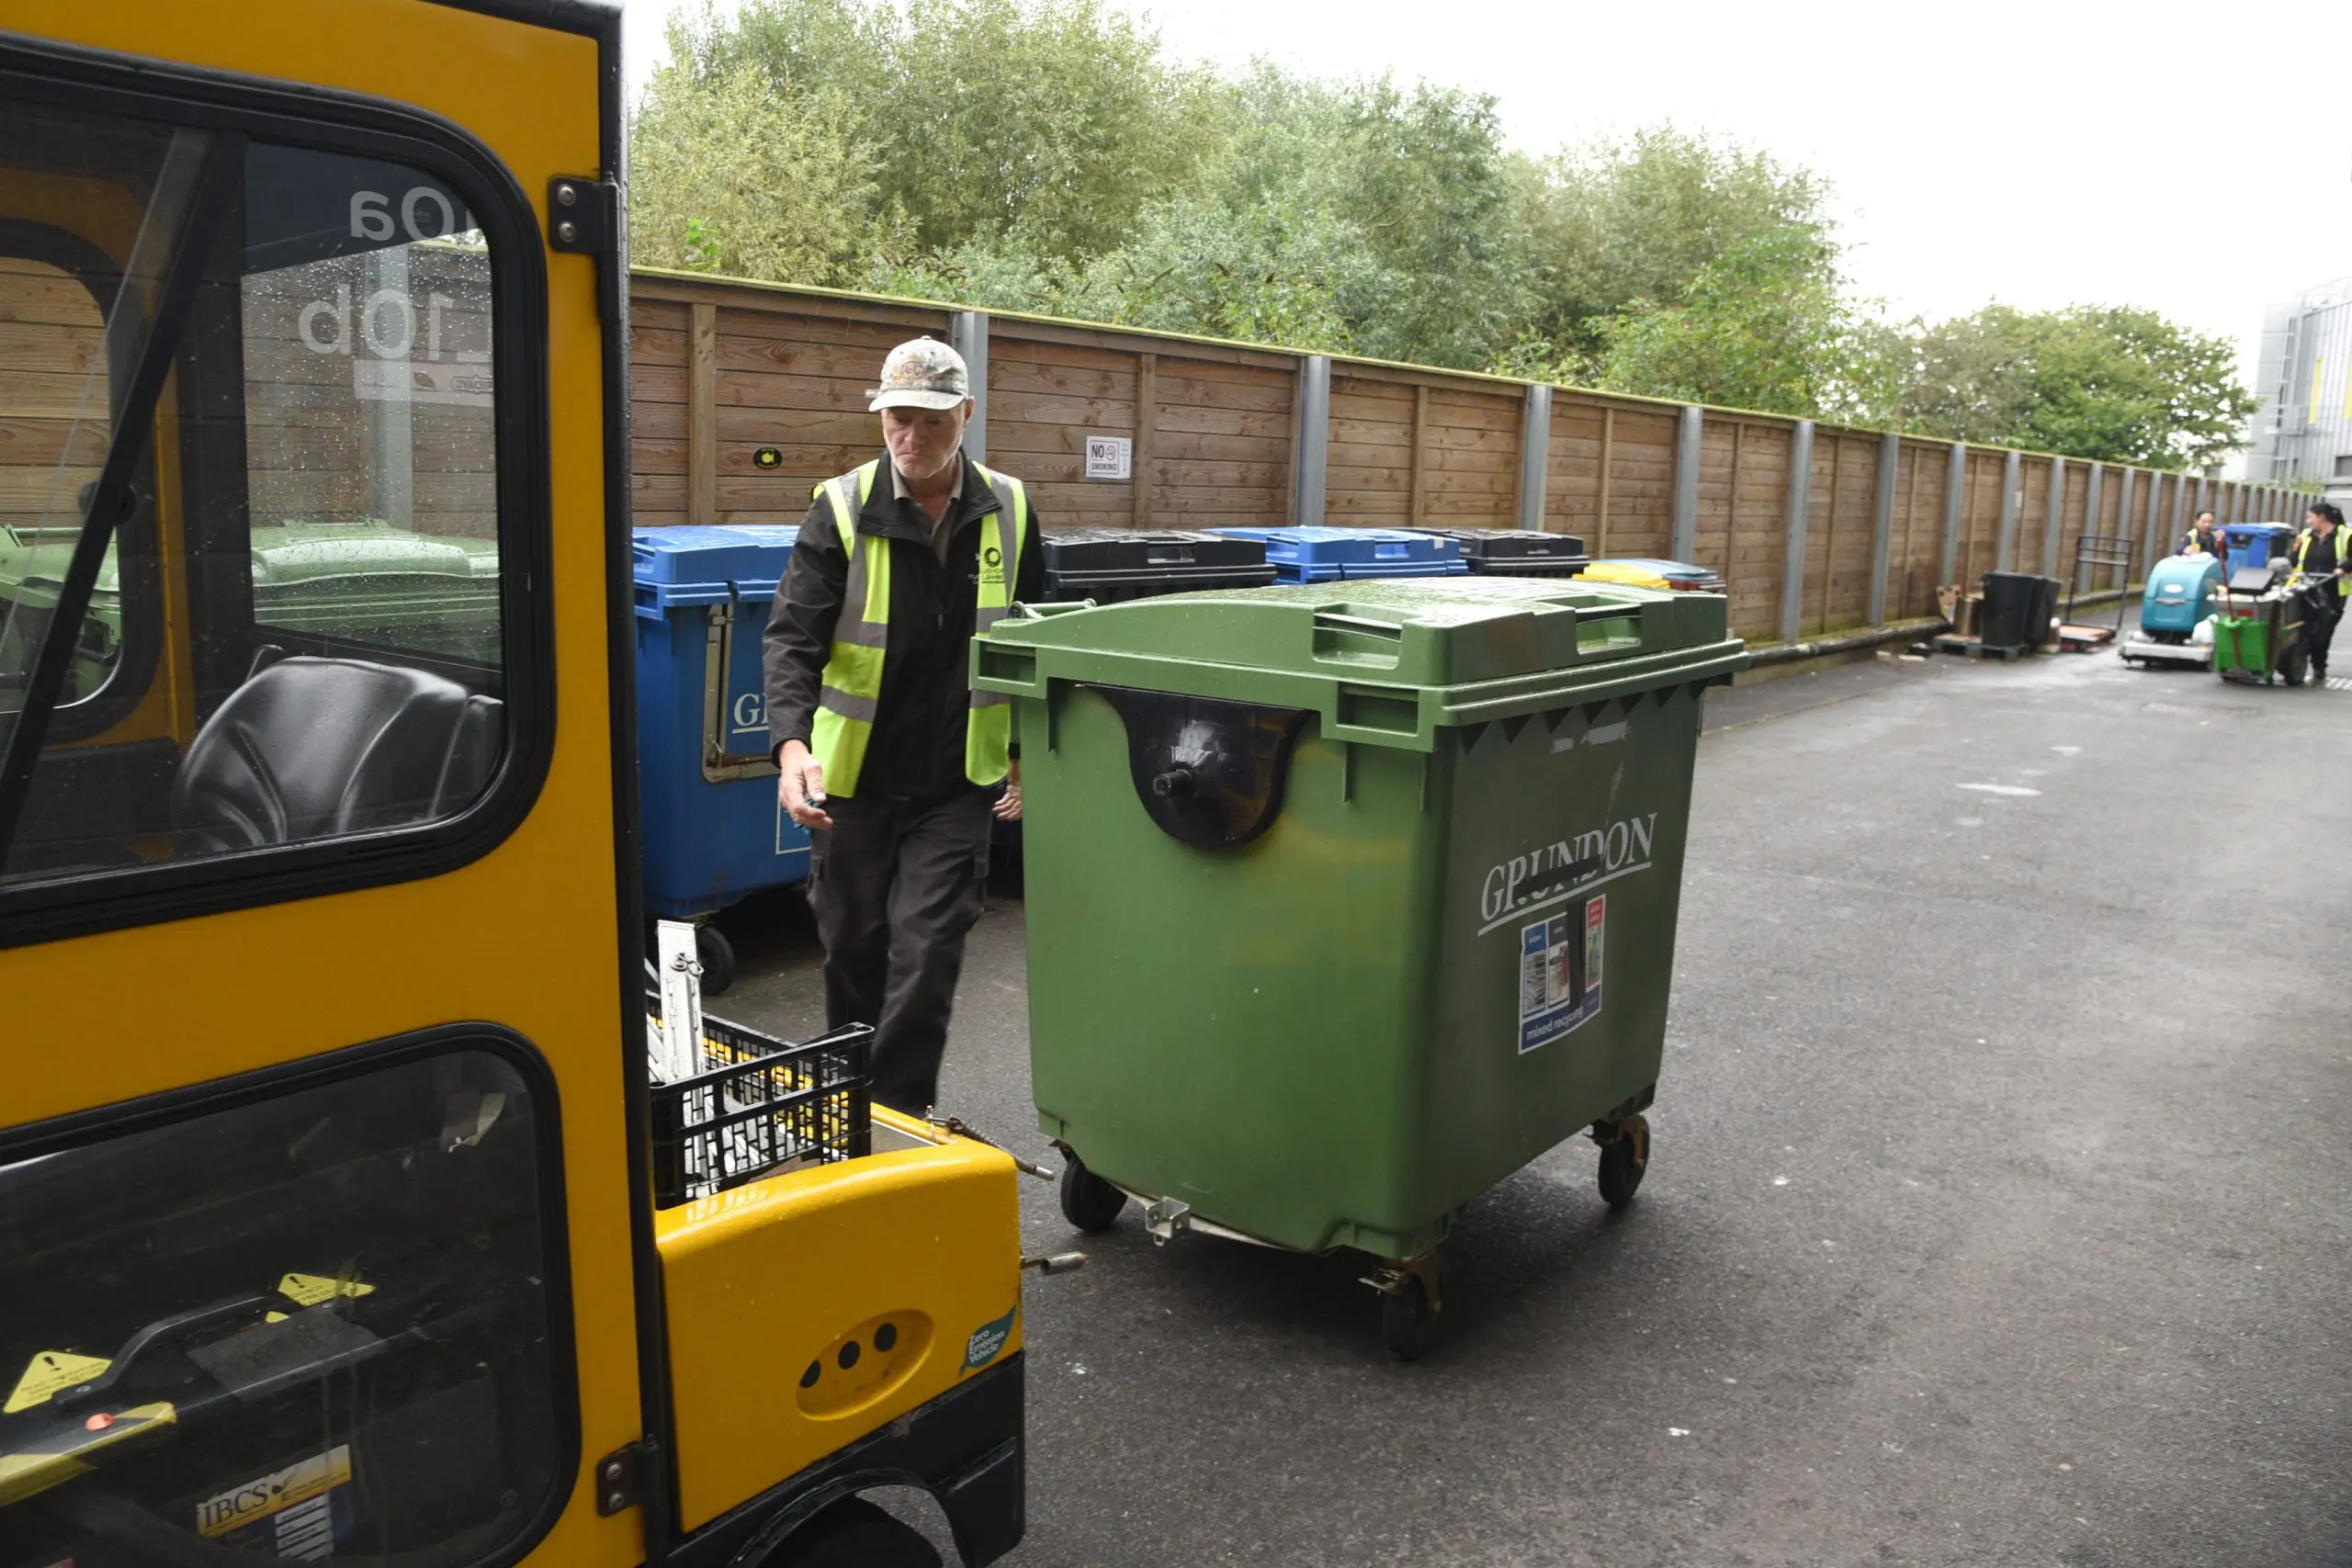 An electric tug is used to take full containers from ‘bin alley’ to the service yard